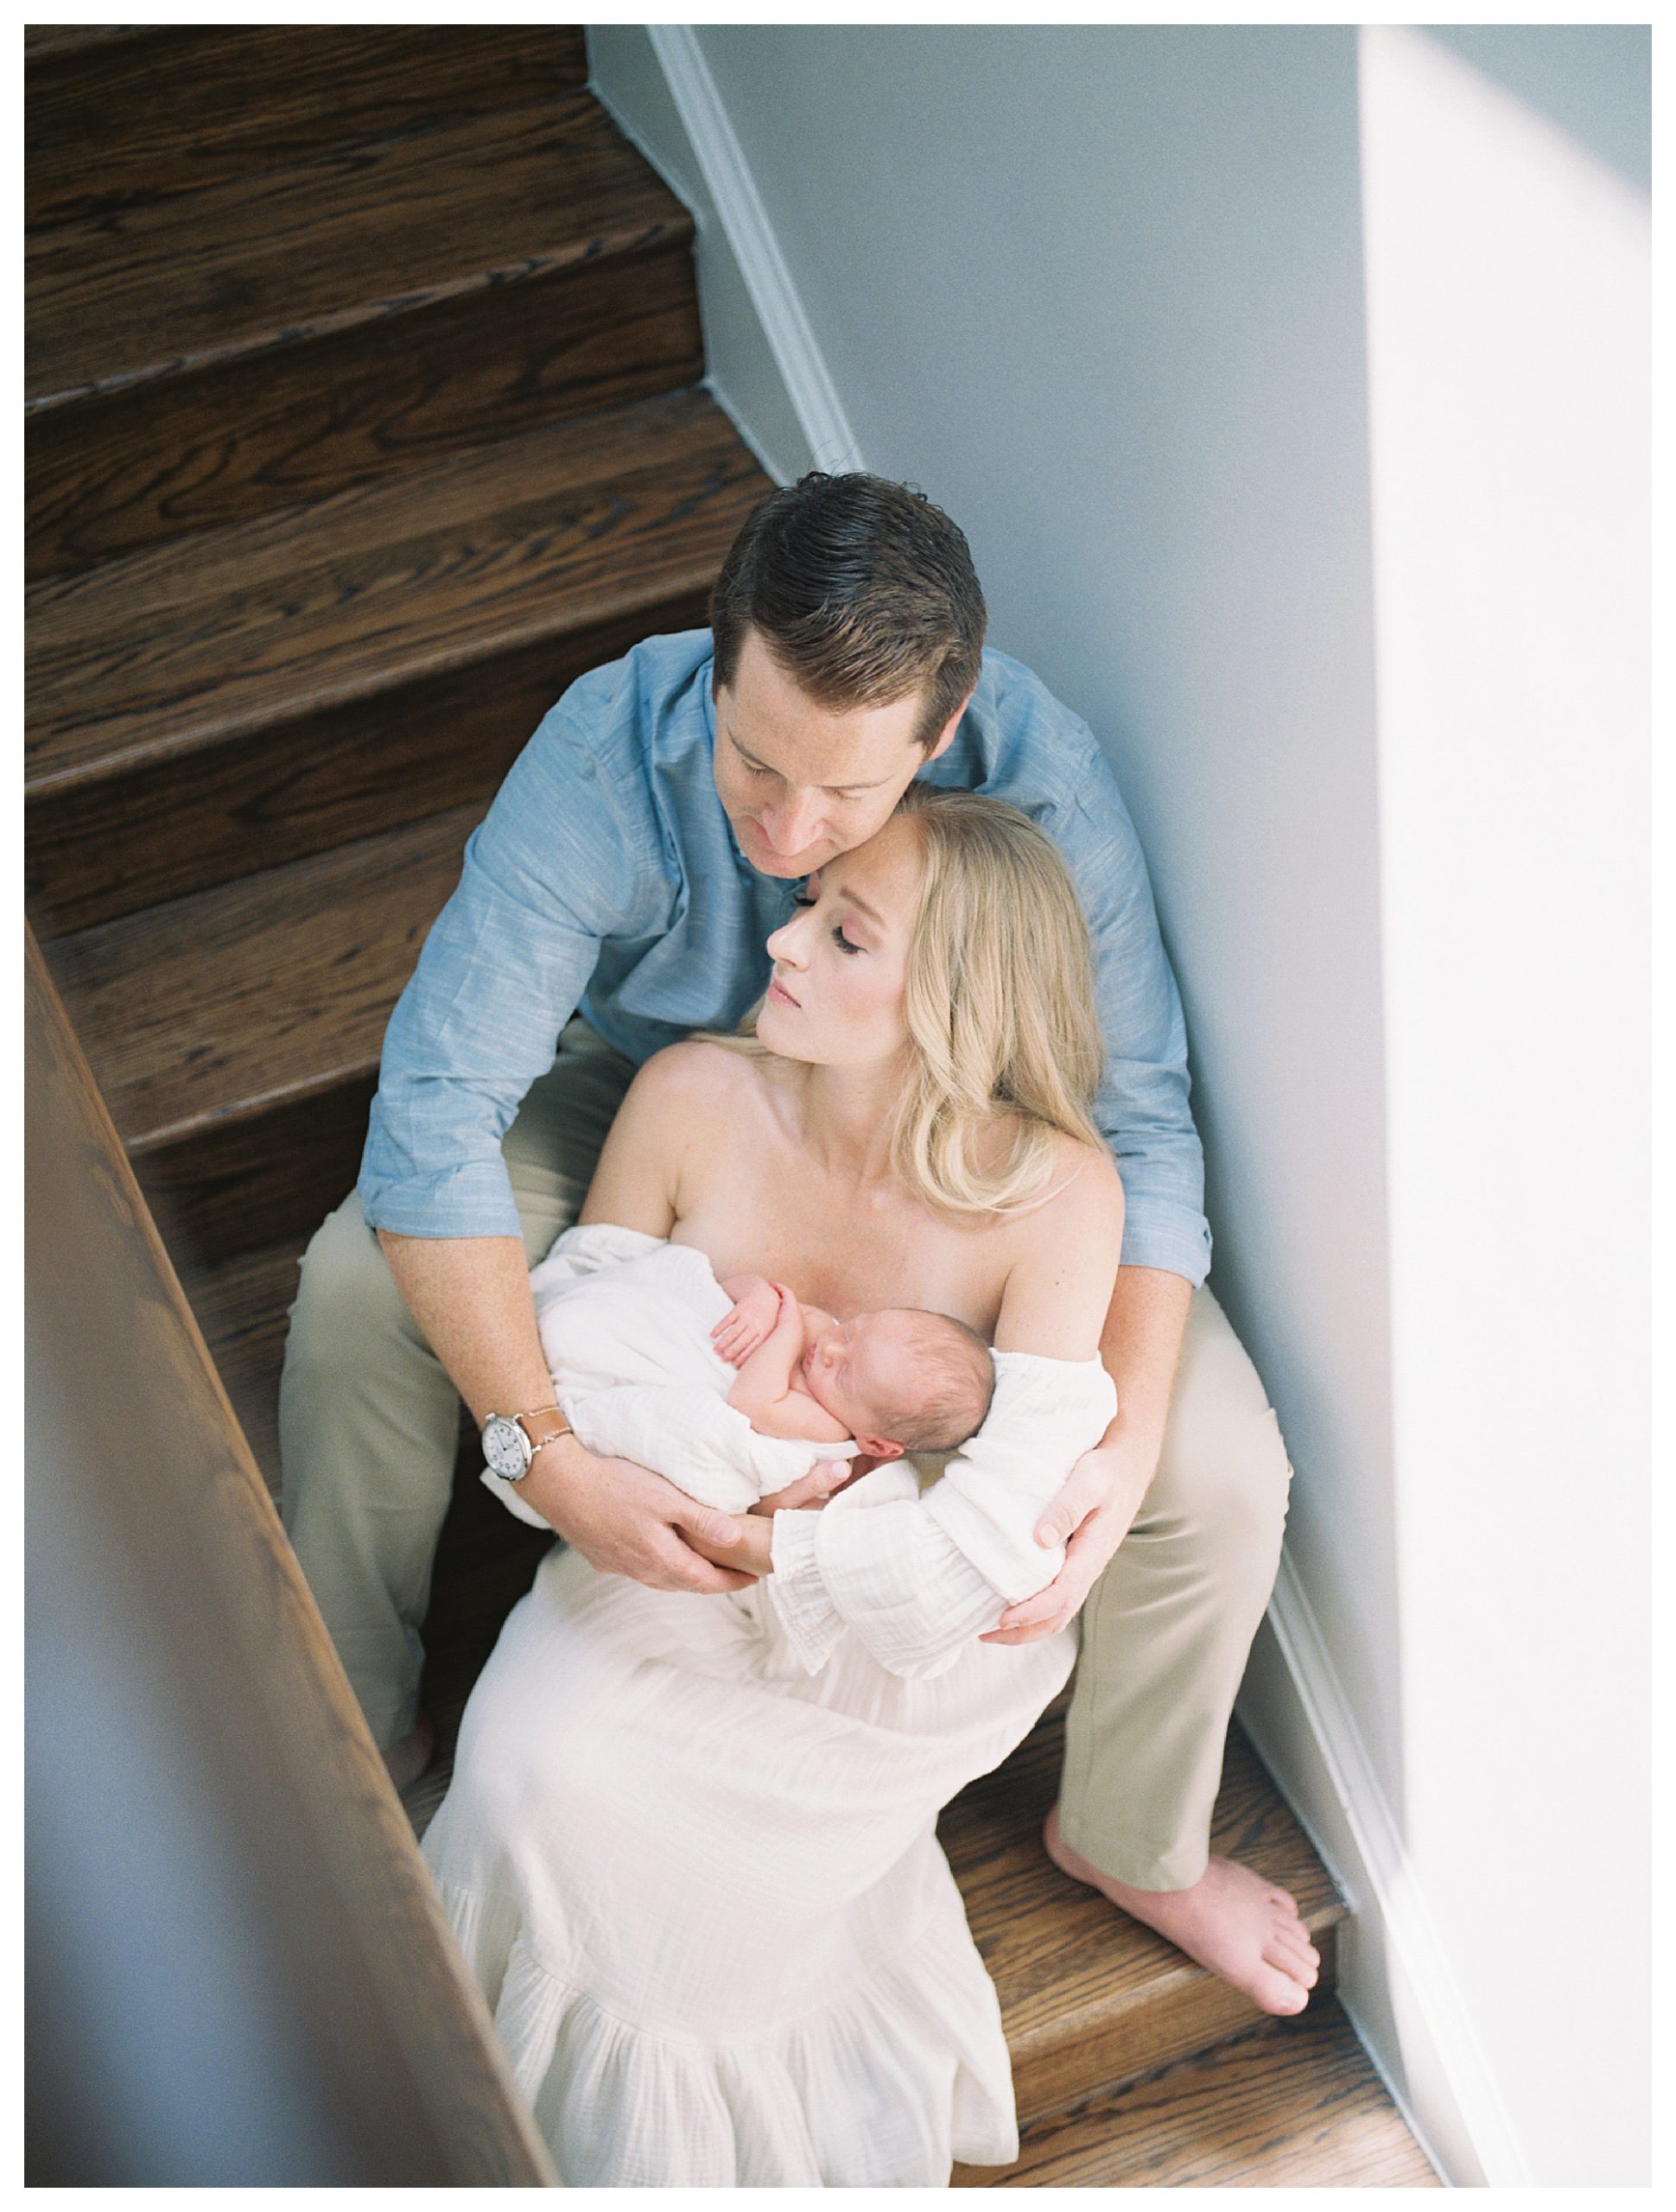 Father and mother sit on steps, leaning into one another as they hold their newborn baby.